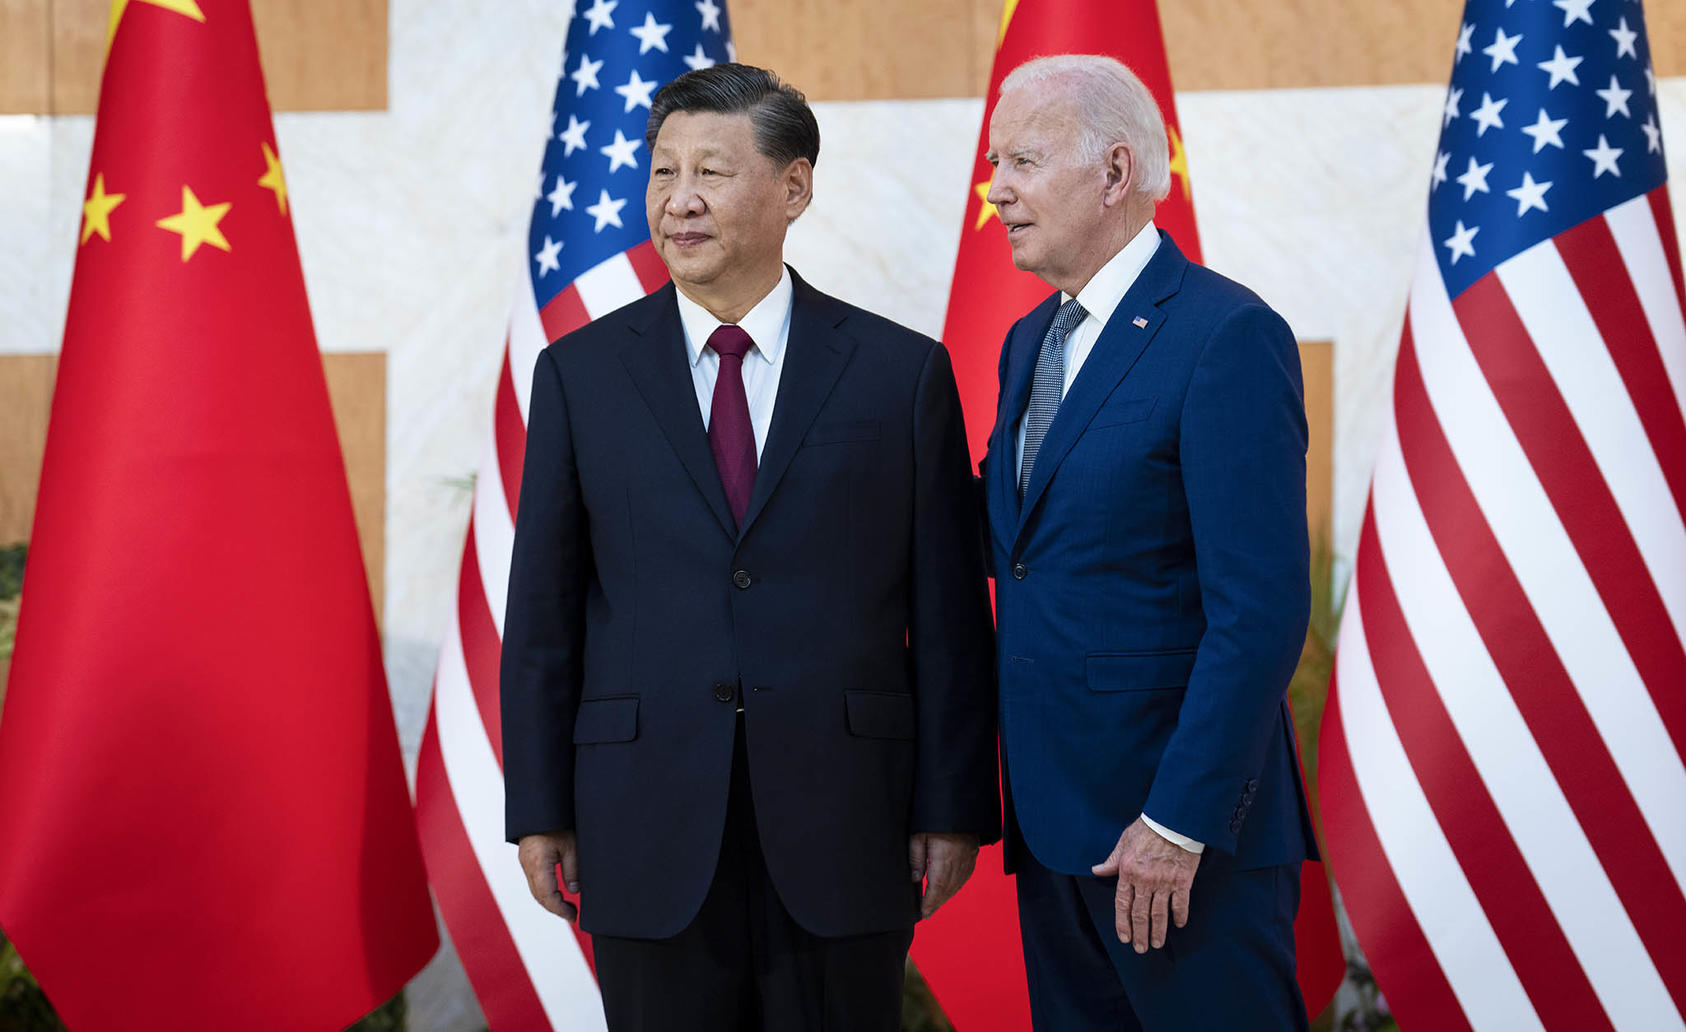 President Joe Biden meets with President Xi Jinping of China ahead of the G-20 meeting in Bali, Indonesia, Nov. 14, 2022. (Doug Mills/The New York Times)